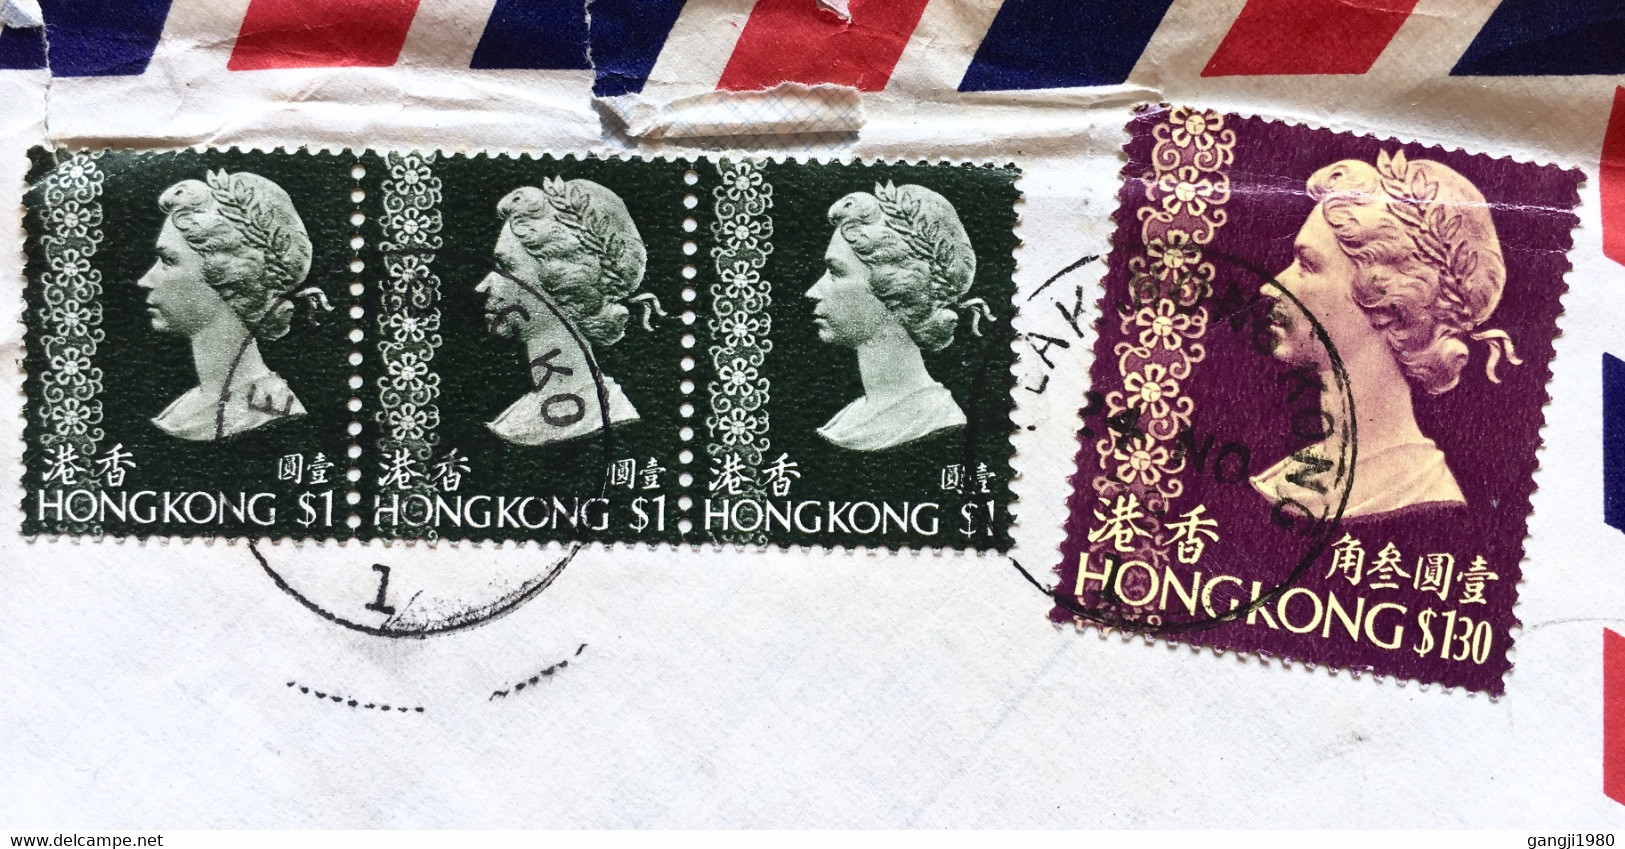 HONG KONG TO ENGLAND 1971, USED COVER, QUEEN 1$ 3 STAMPS, 1.30$ ONE STAMP, VIGNETTE EXPRESS LABEL, LAKE HONG KONG CANCEL - Brieven En Documenten